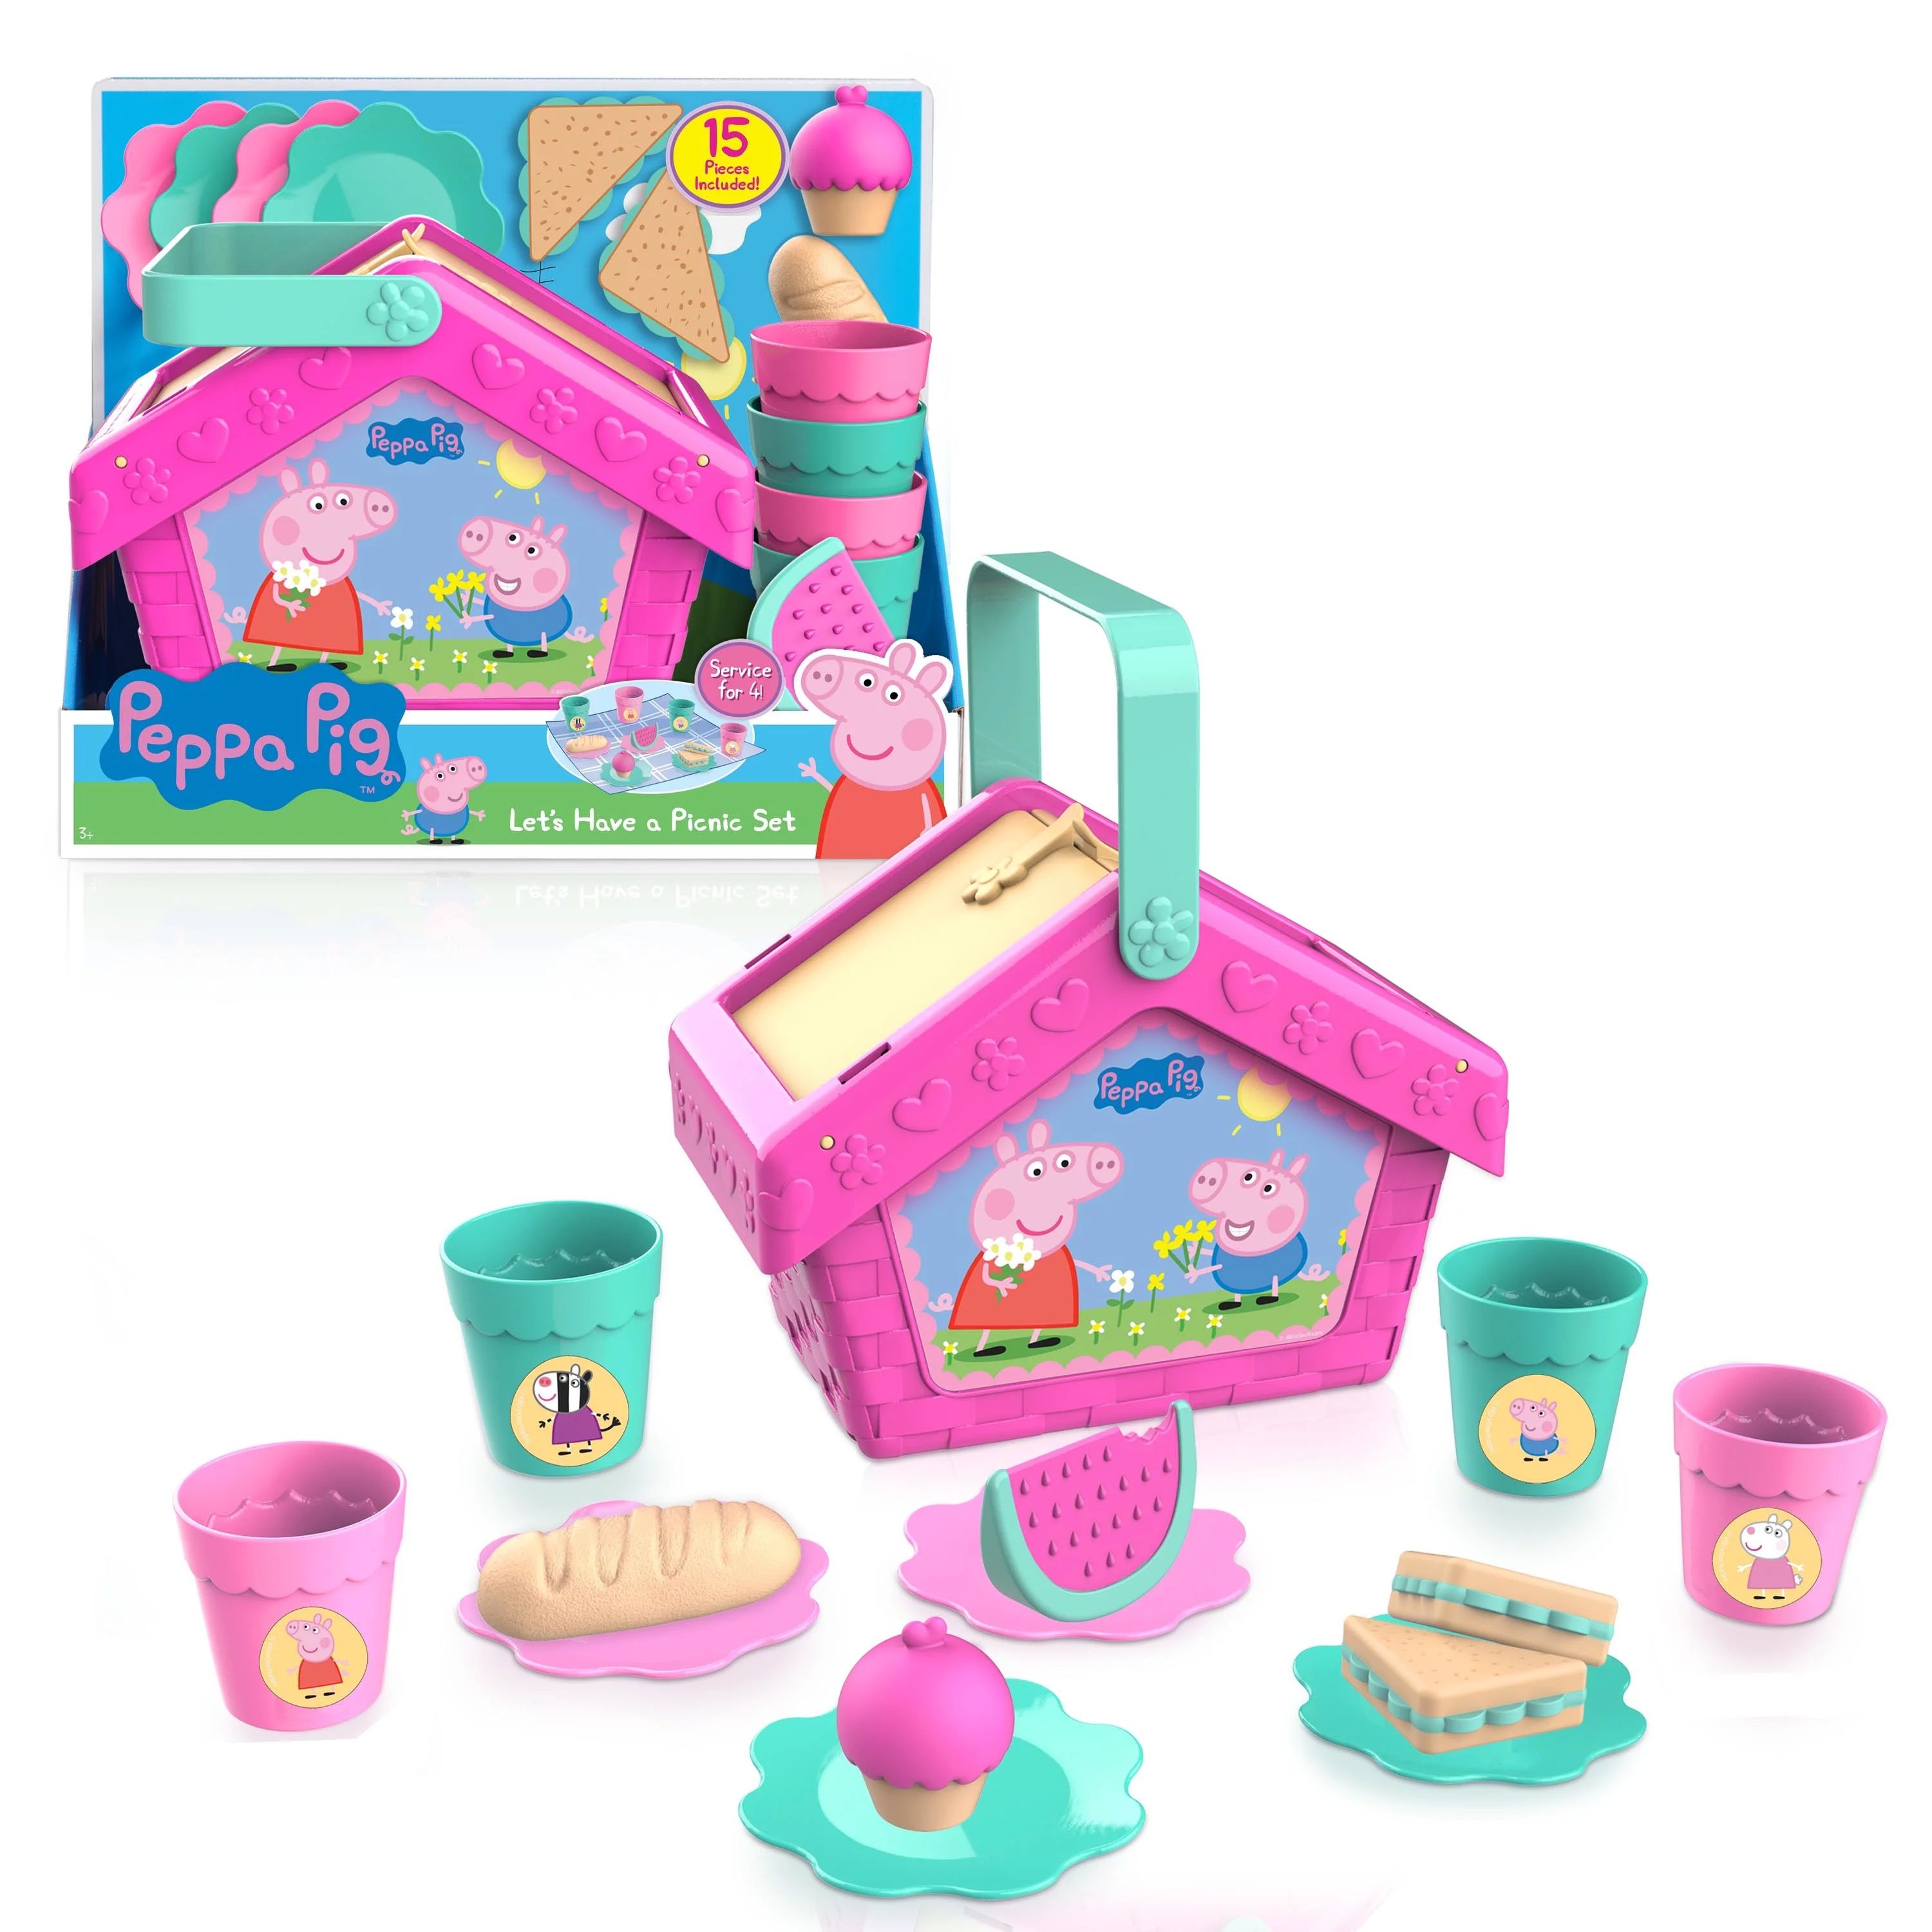 Just Play Peppa Pig Let's Have a Picnic Set, Travel Toy with Handle Includes 4 Settings and Play ... | Walmart (US)